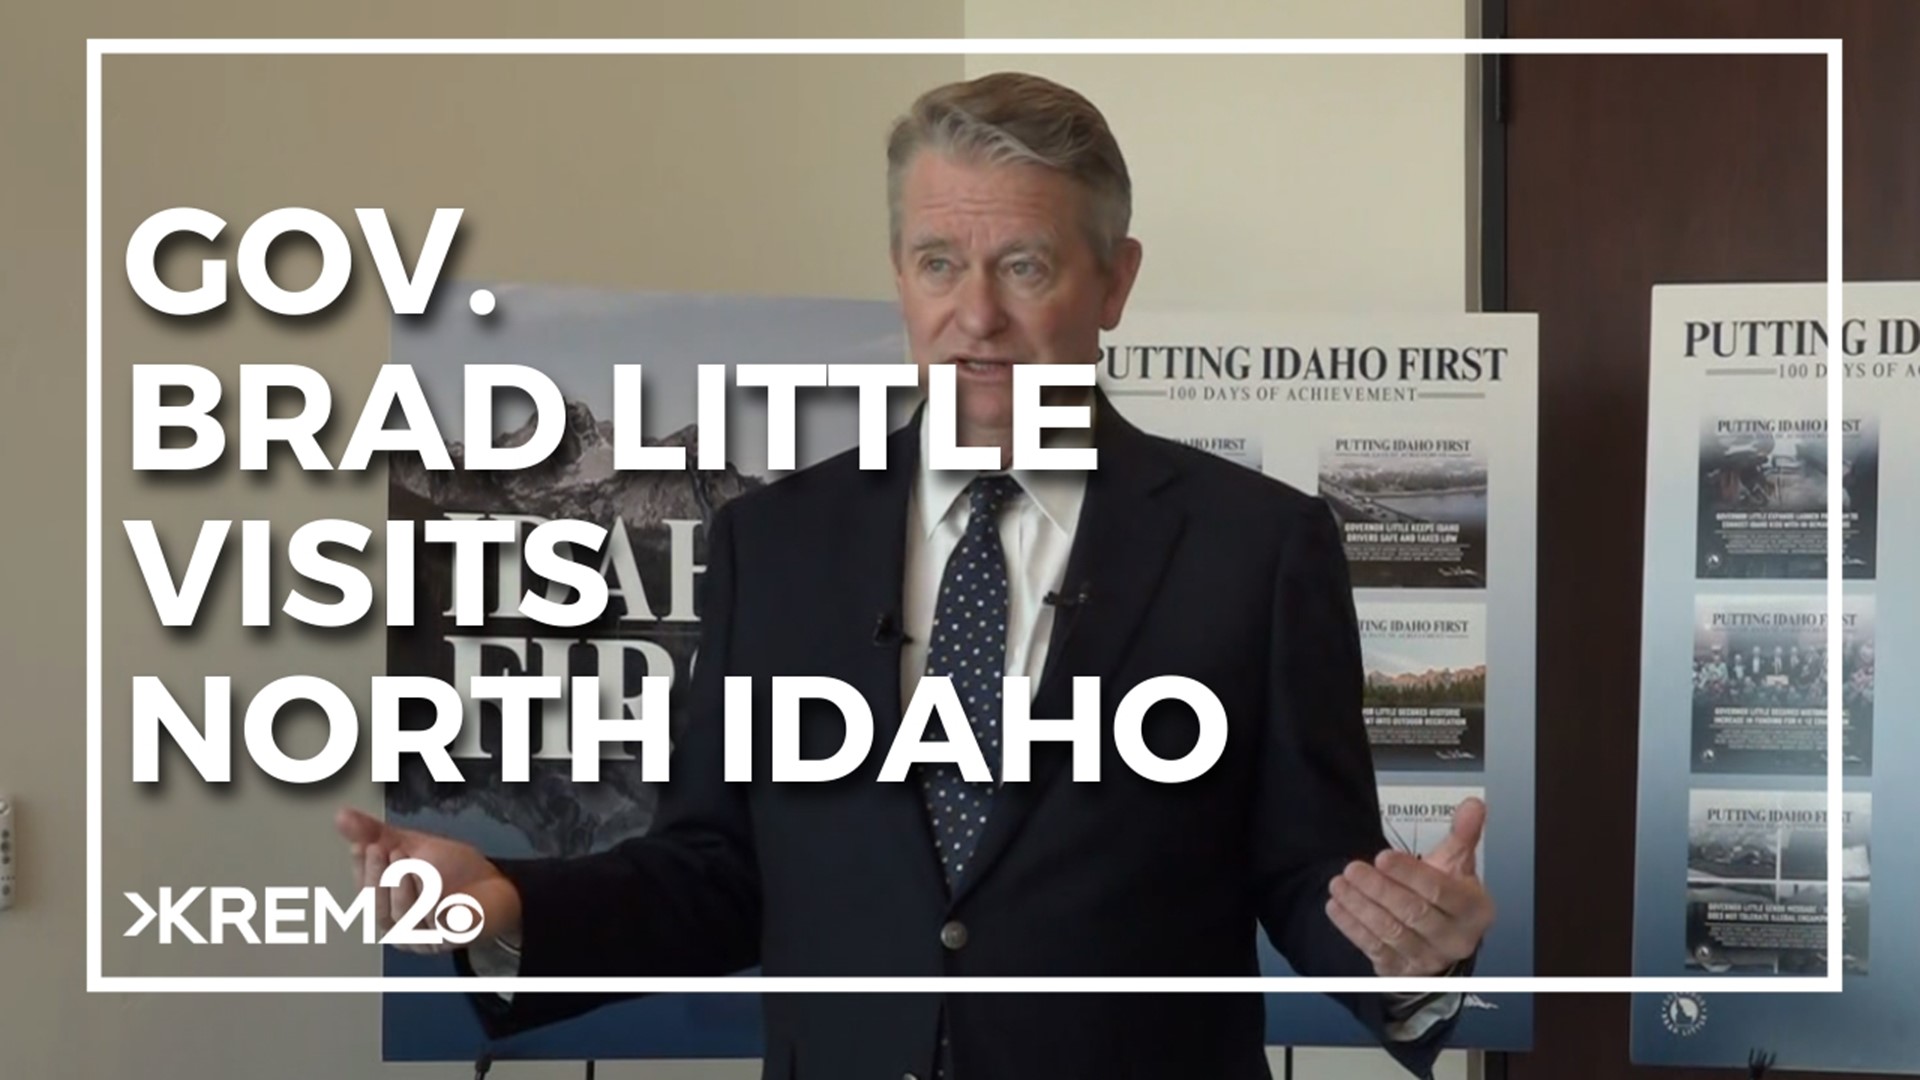 The governor was touring the state to discuss the first 100 days of the legislative session and his 'Idaho First' initiative.